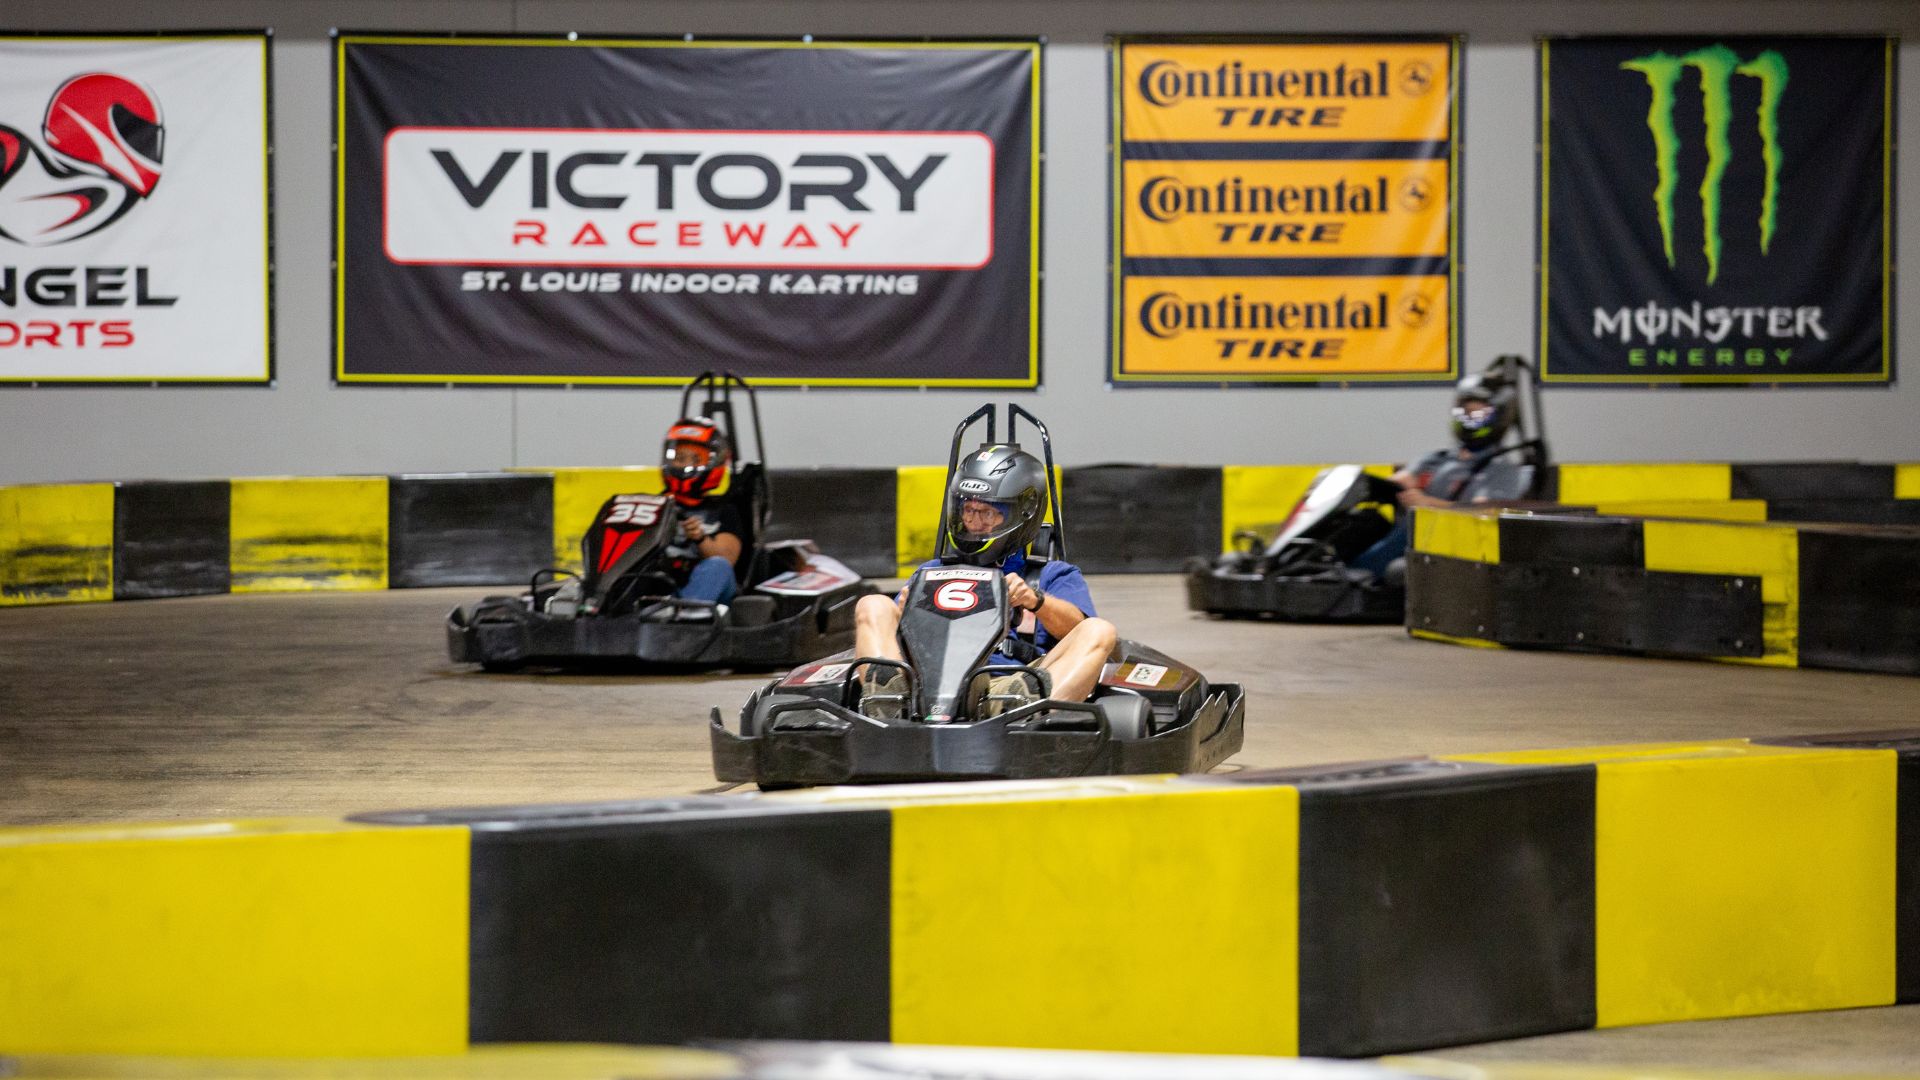 People drive electric go-karts at Victory Raceway in St. Louis.